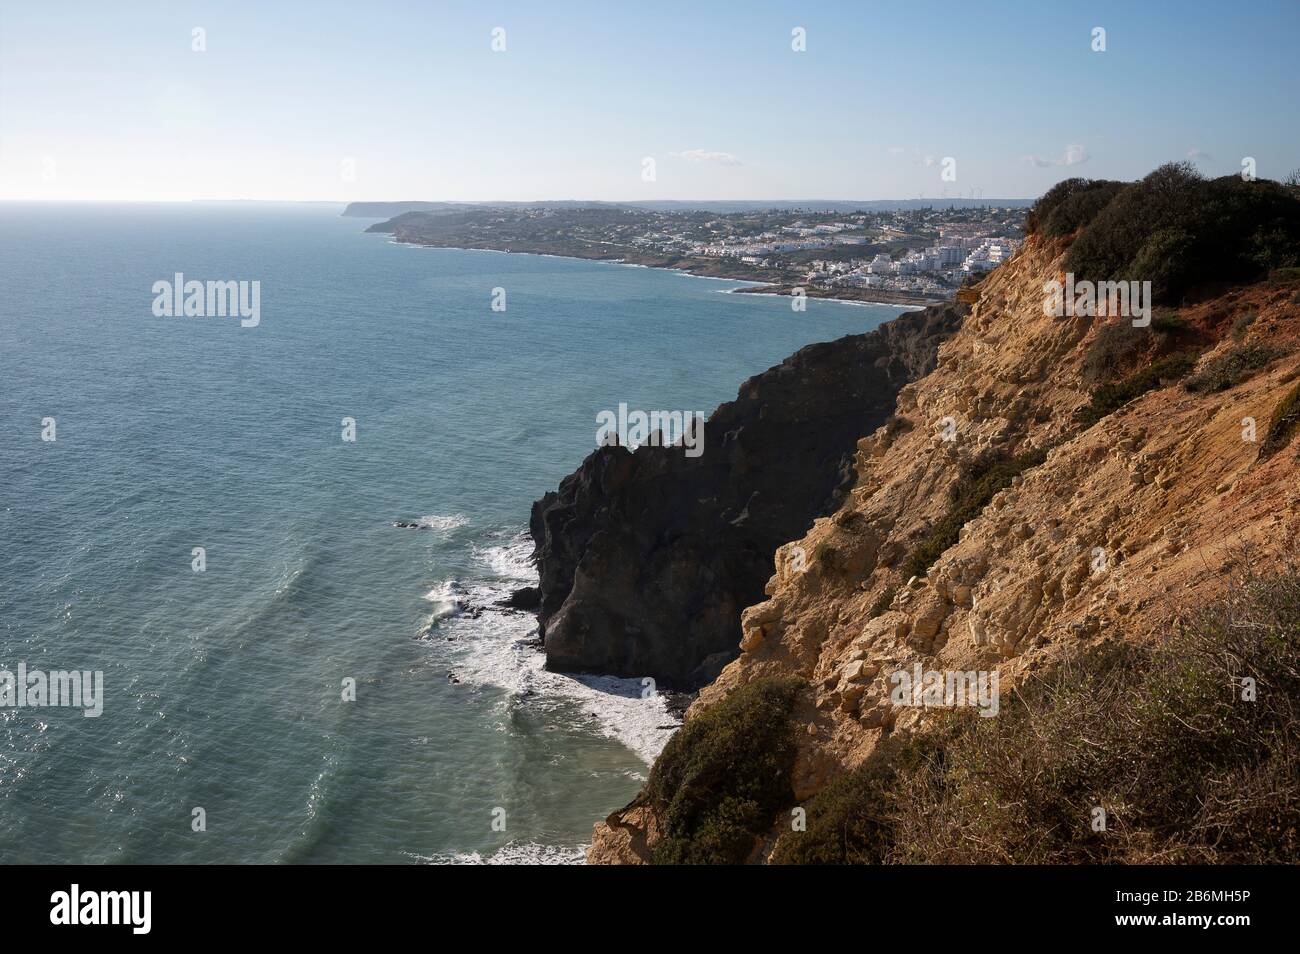 Black Rocks and cliffs on the coastline between Lagos and Luz, Portugal Stock Photo